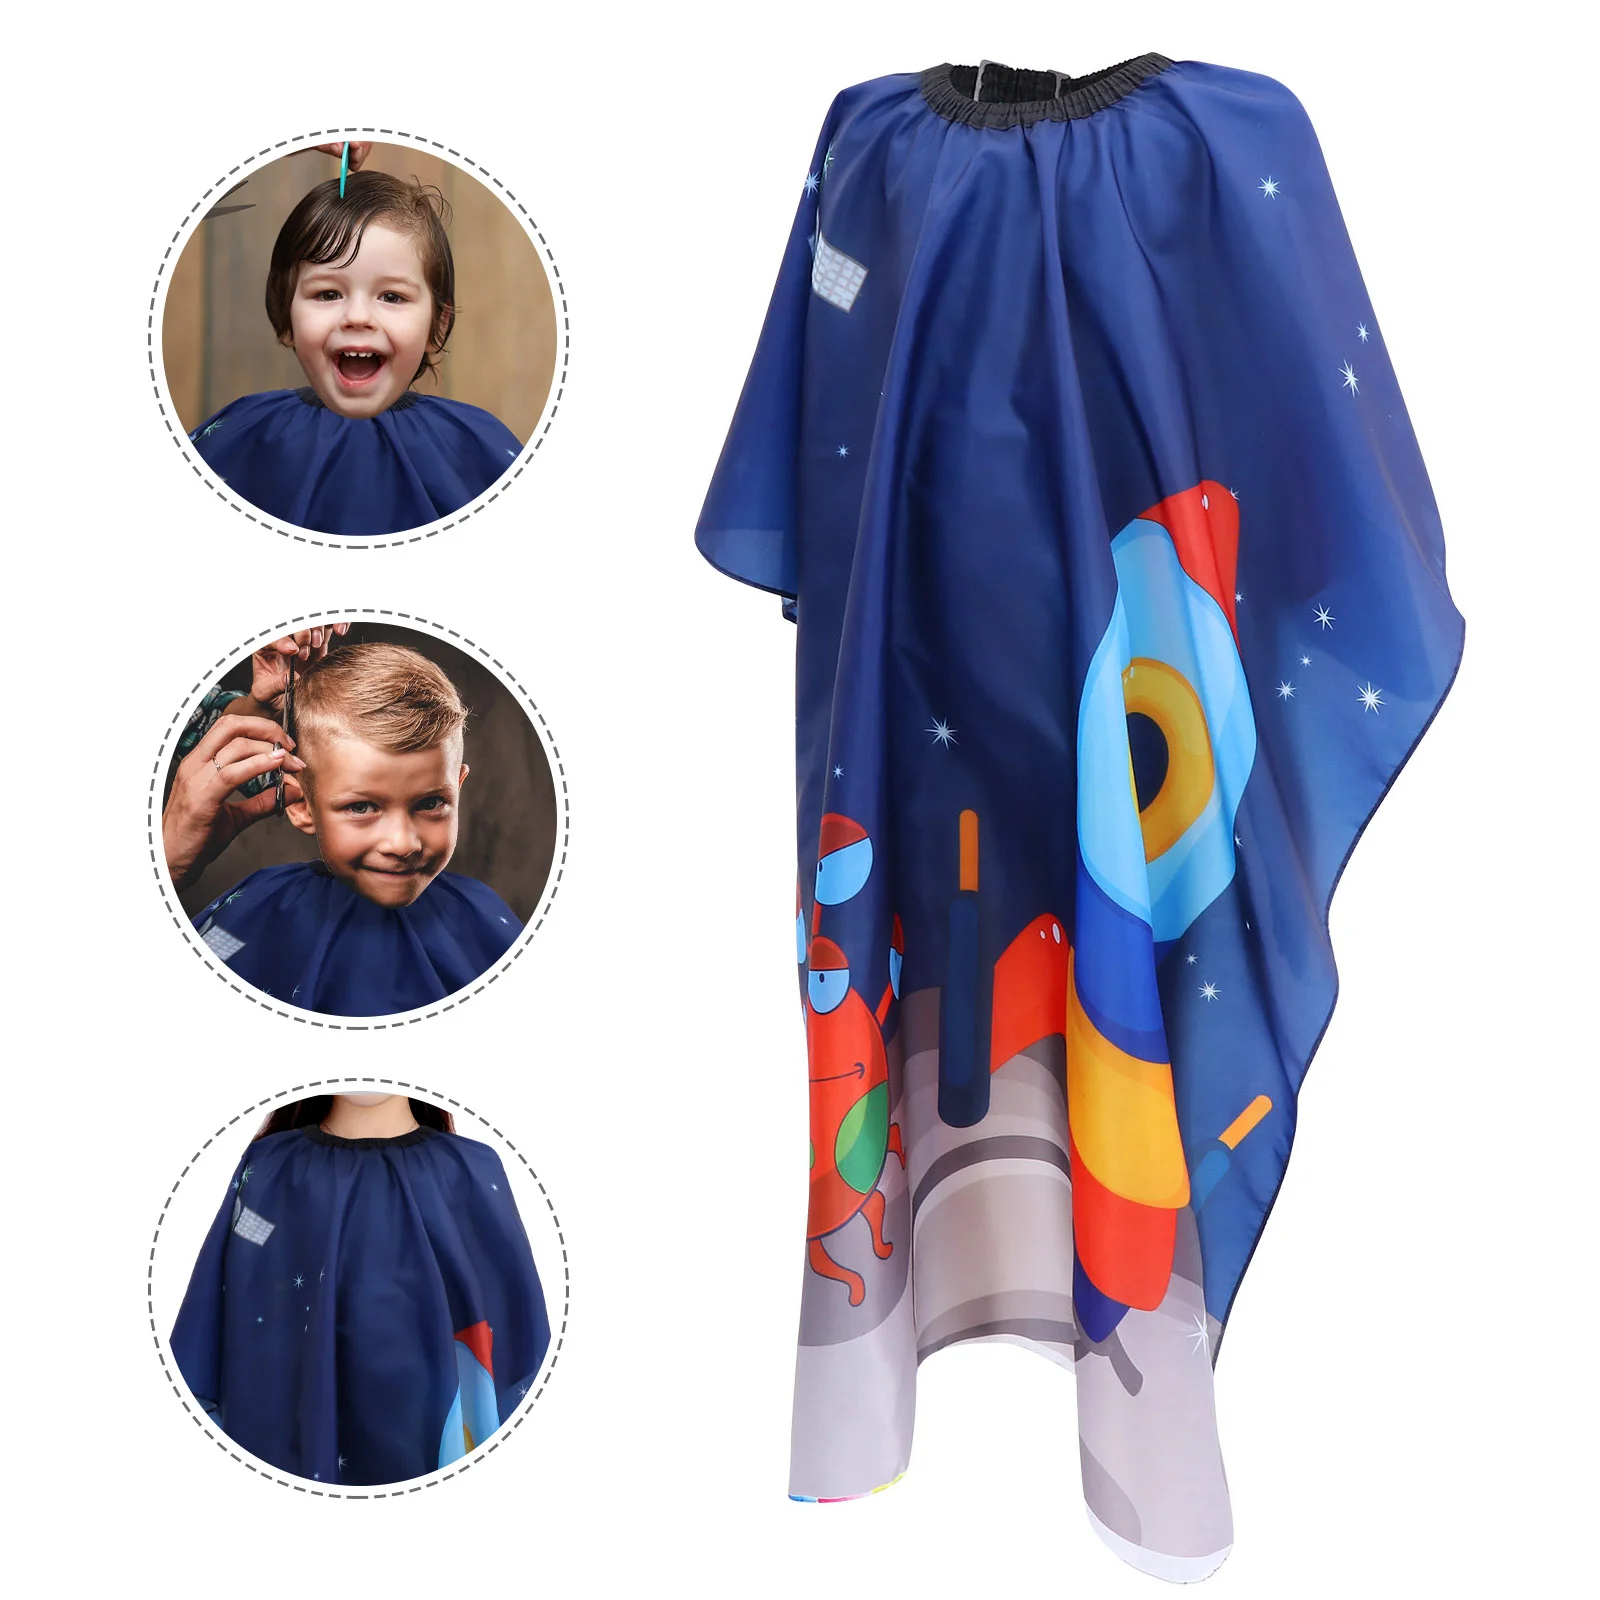 

Cape Hair Haircut Cutting Kids Apron Barber Hairdressing Gown Capes Children Salon Client Dye Child Professional Smock Catcher